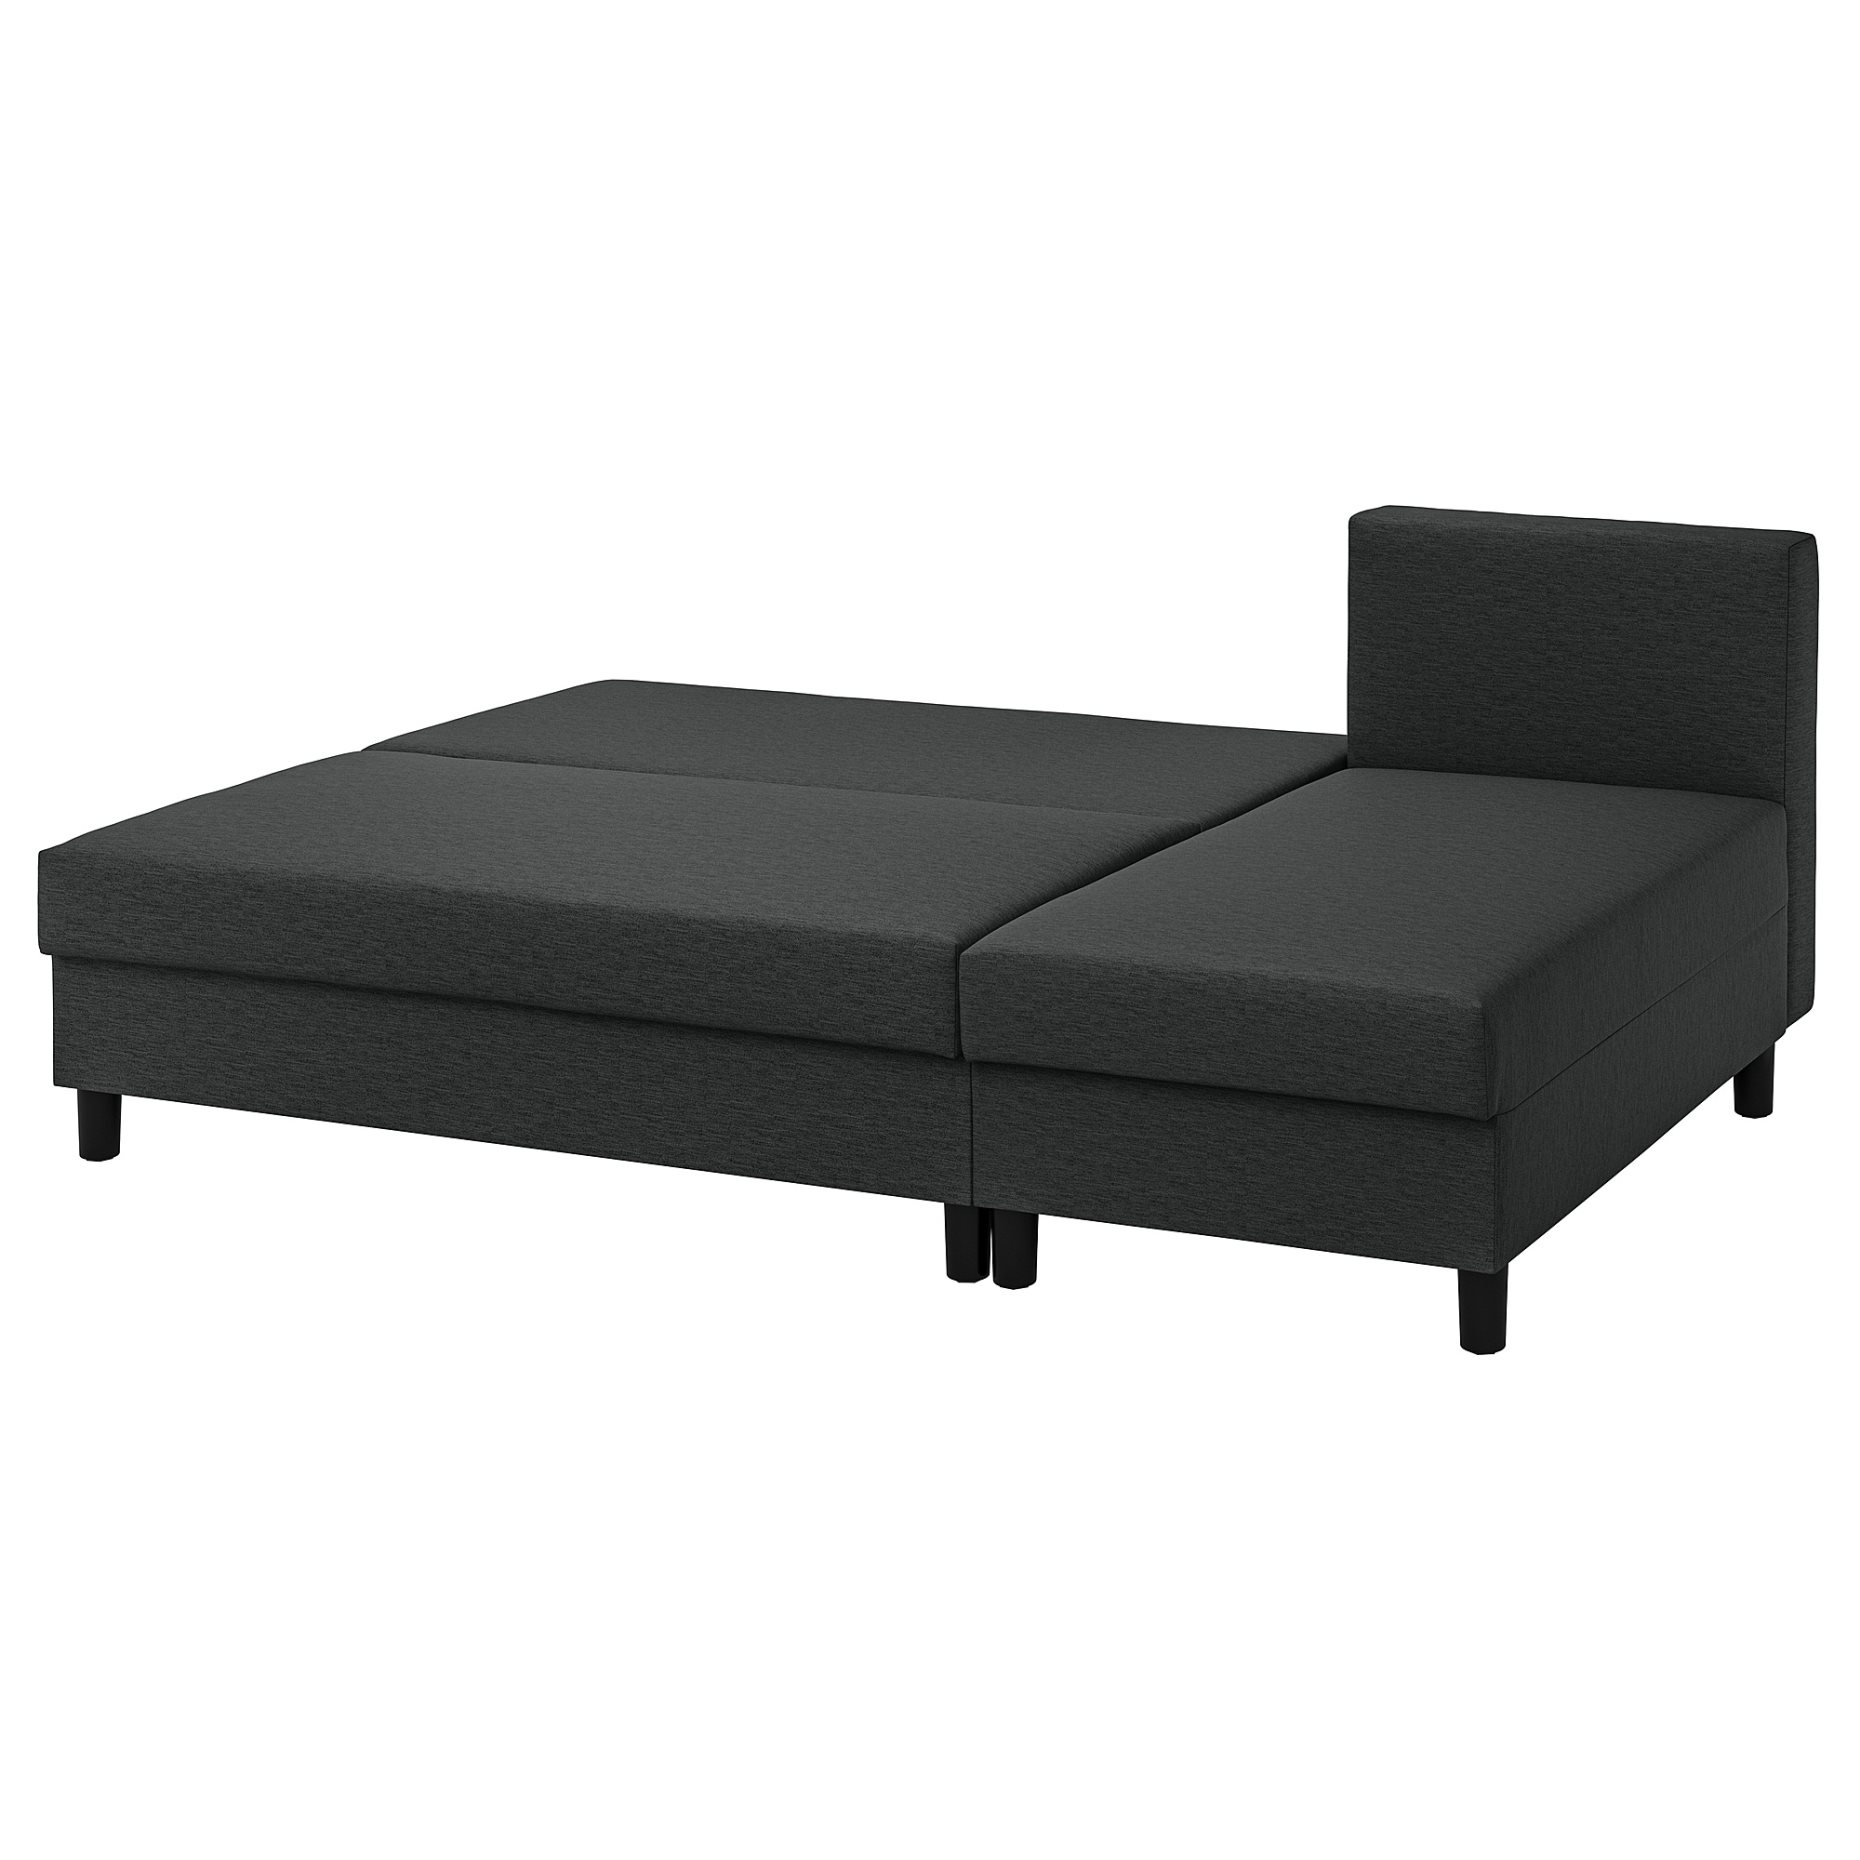 ÄLVDALEN, 3-seat sofa-bed with chaise longue, 205.306.64